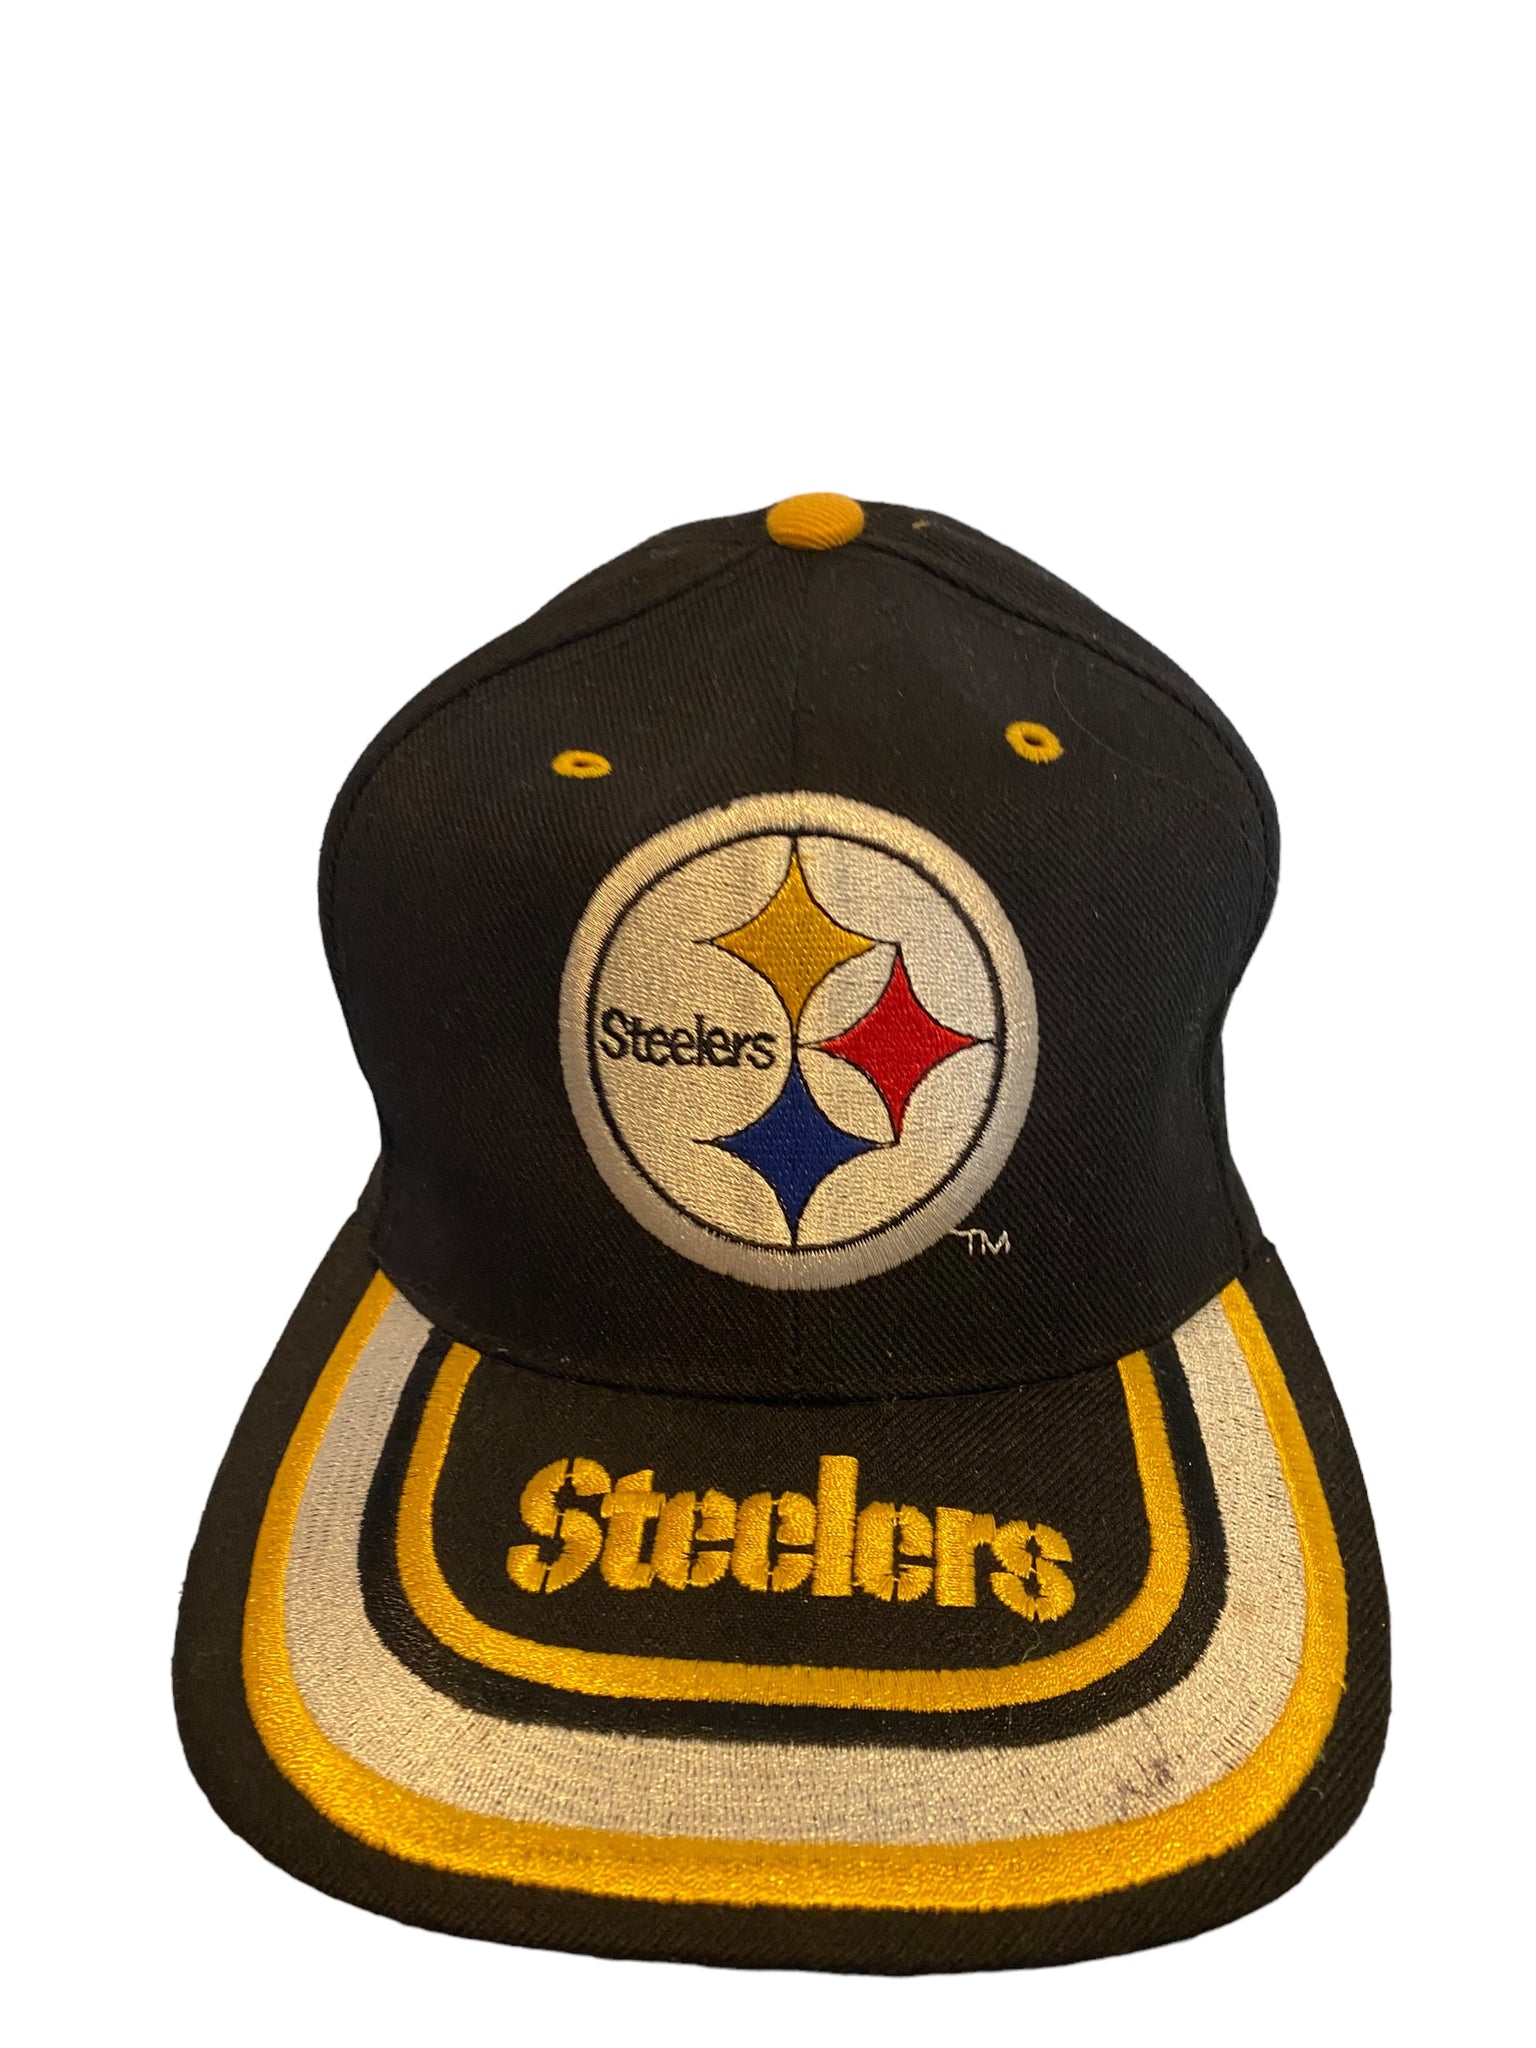 nfl pro player nfl experience pittsburgh steelers hat w embroidered logo snapbac